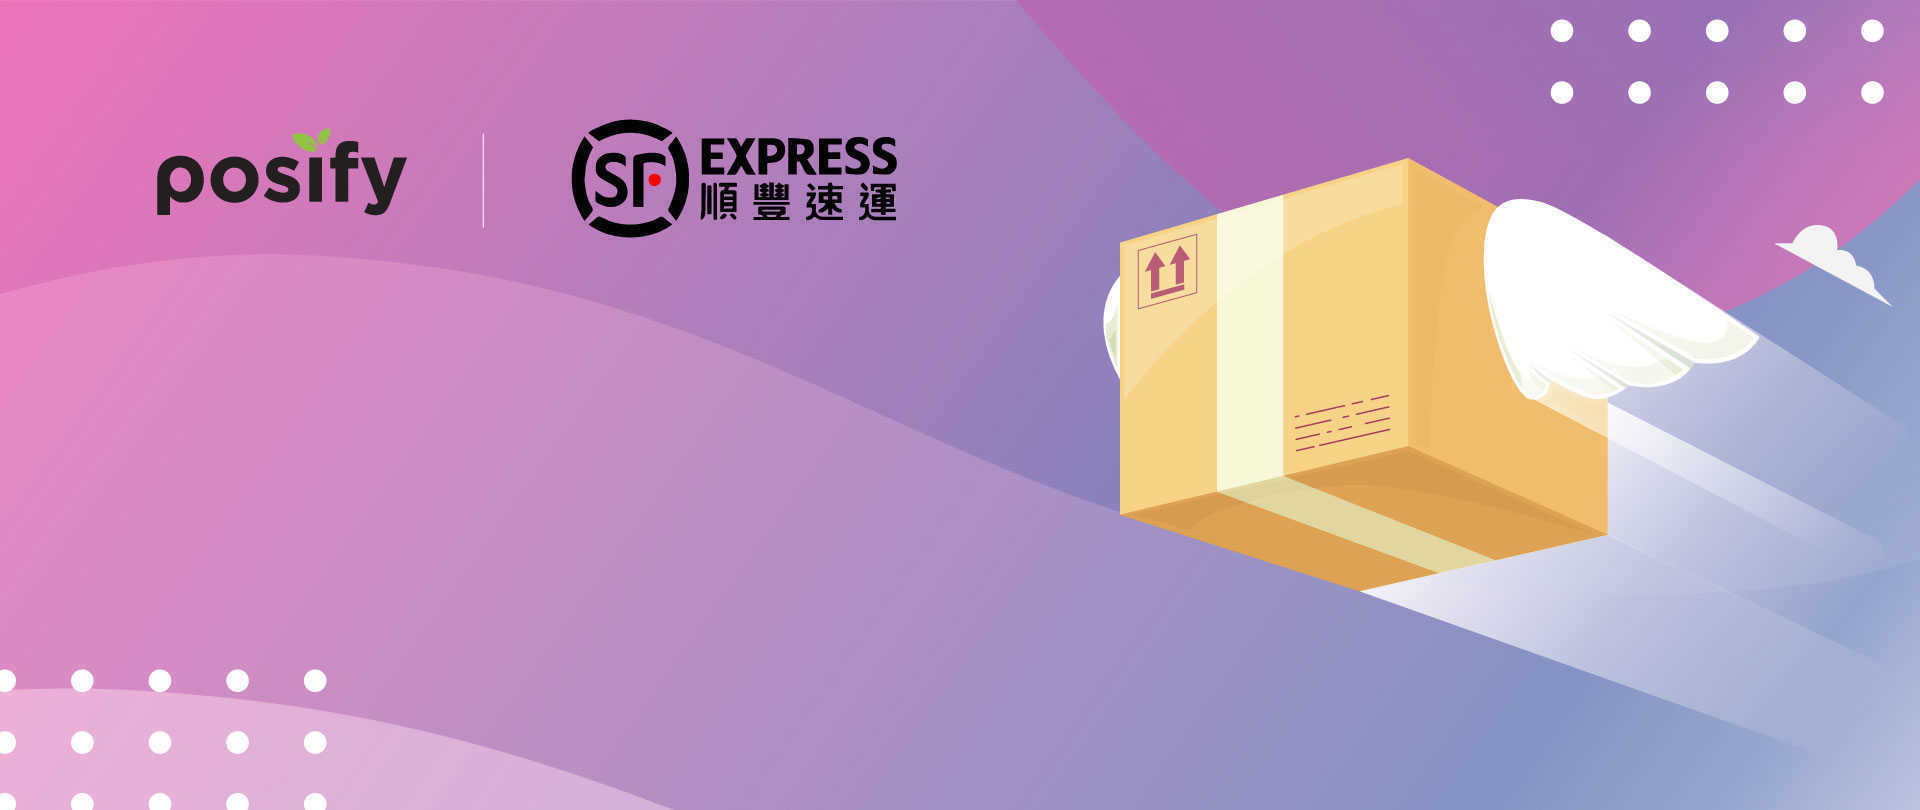 Posify connects SF Express and launches the automatic shipping function